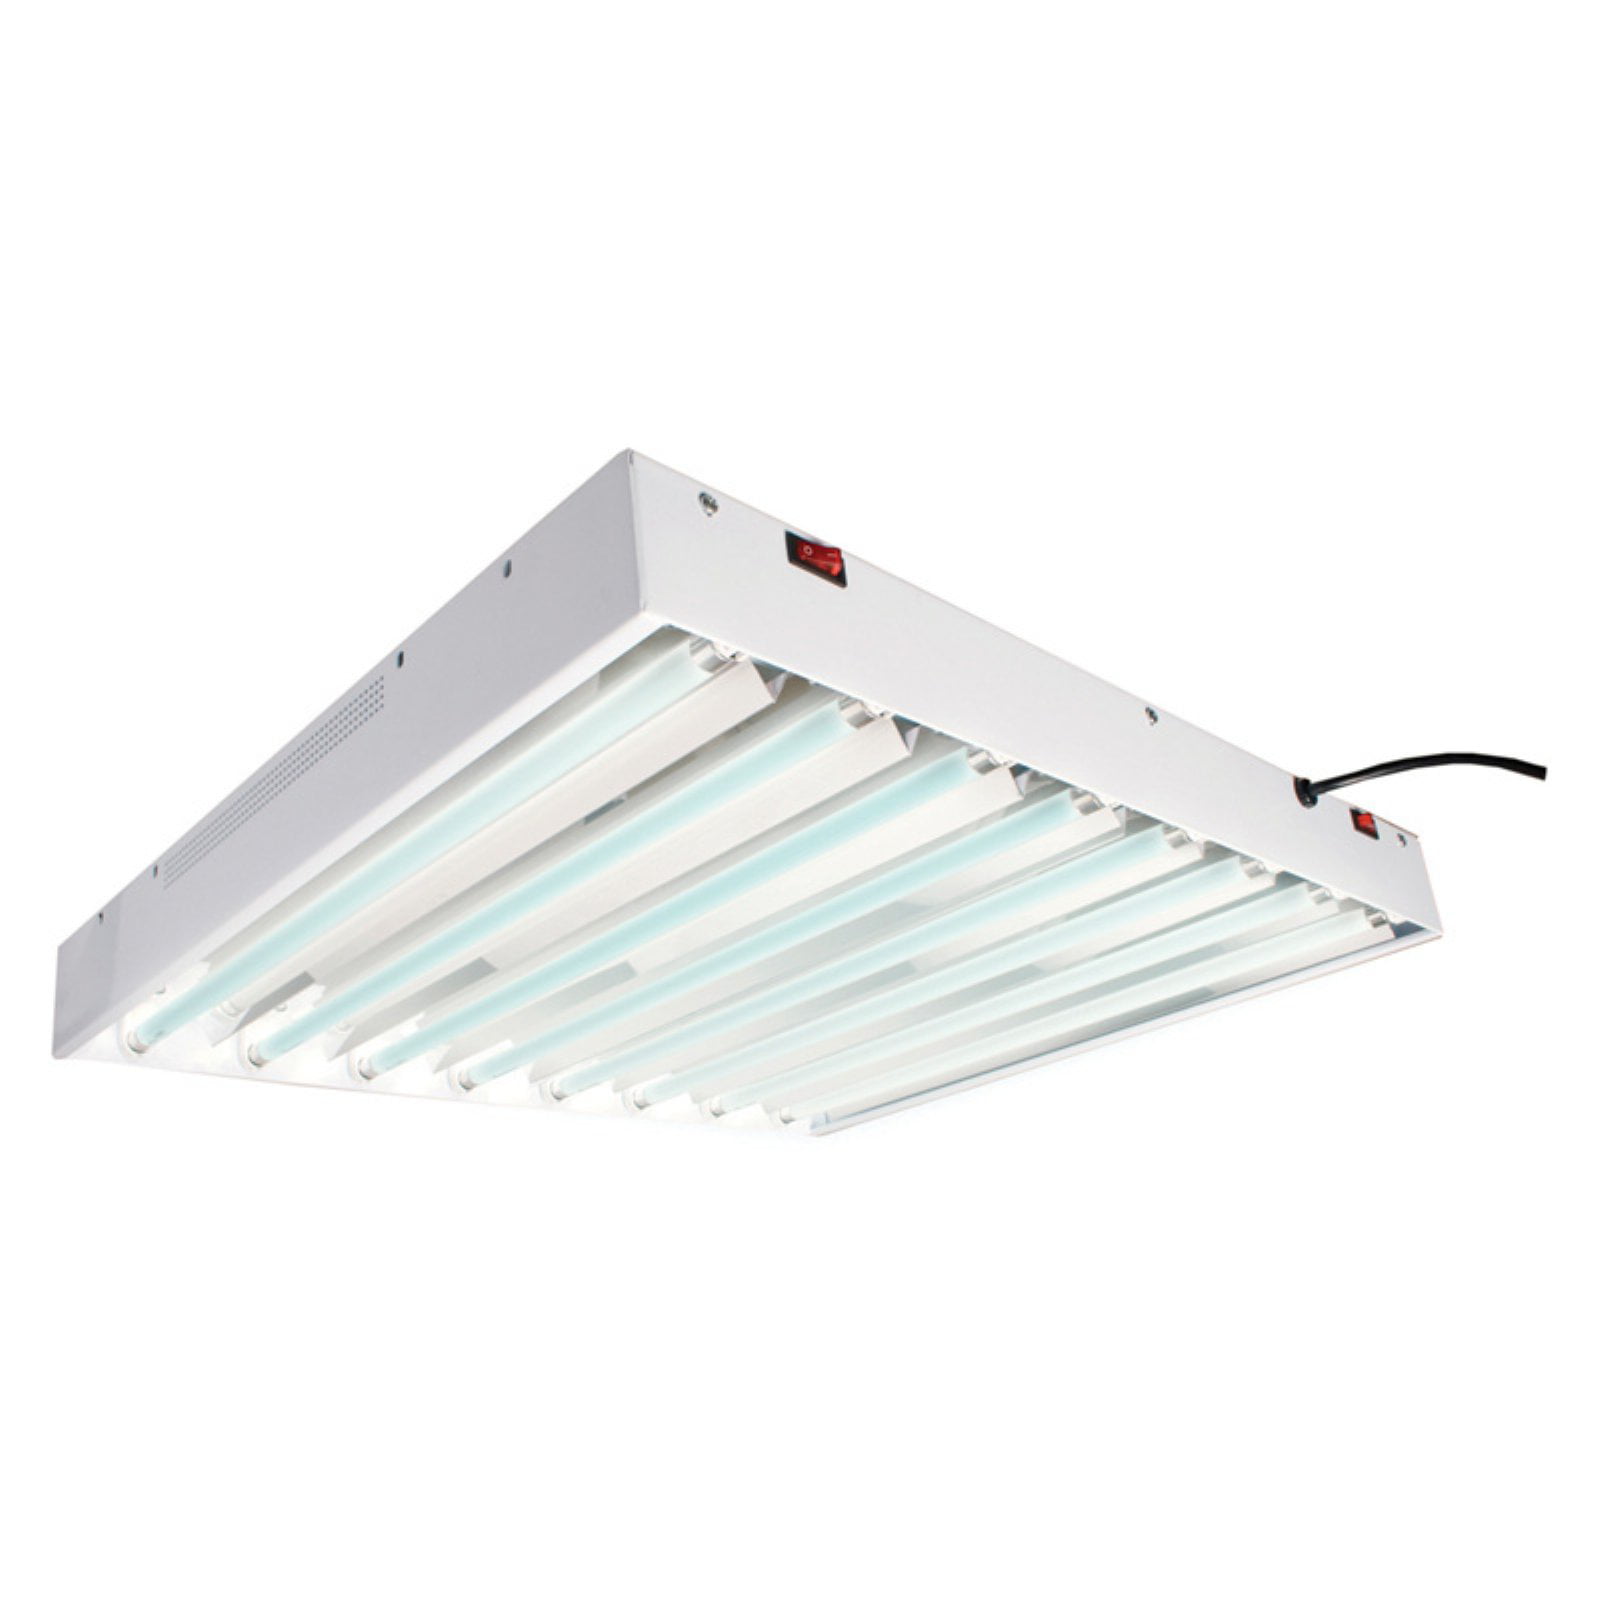 Hydroplanet T5 4ft 8lamp Fluorescent Ho Bulbs Included for Indoor Horticultur... 